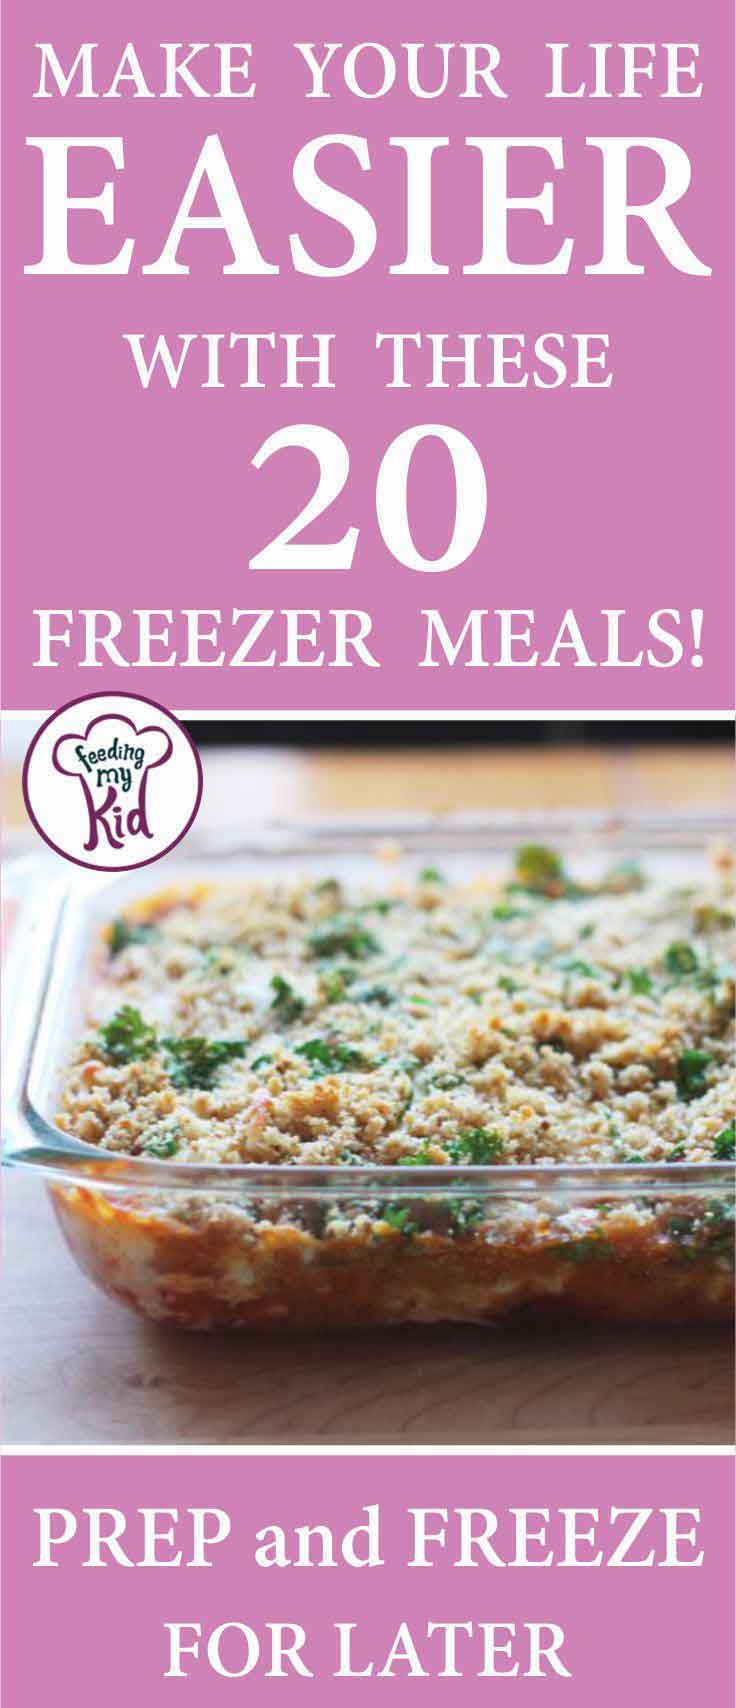 Freezer meals are perfect for bath cooking! Save a bunch of food for later and just defrost before dinner time. Super simple.